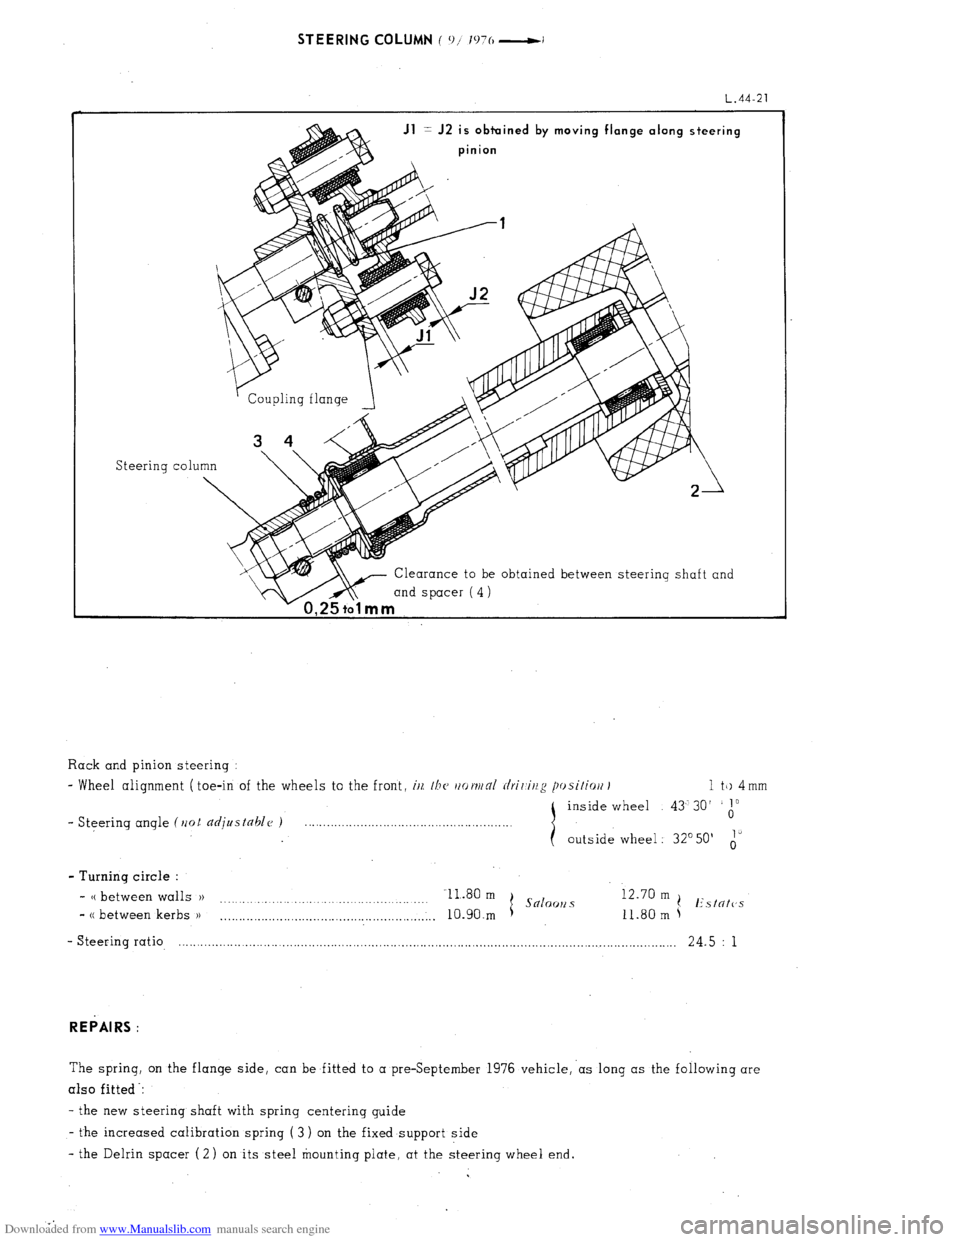 Citroen CX 1980 1.G Workshop Manual Downloaded from www.Manualslib.com manuals search engine STEERING COLUMN ( ‘11’ l’)‘o -1 
L.44-21 
Jl = J2 is obtuined by moving flange along steering 
pinion 
Steering co1 
Clearance to be ob